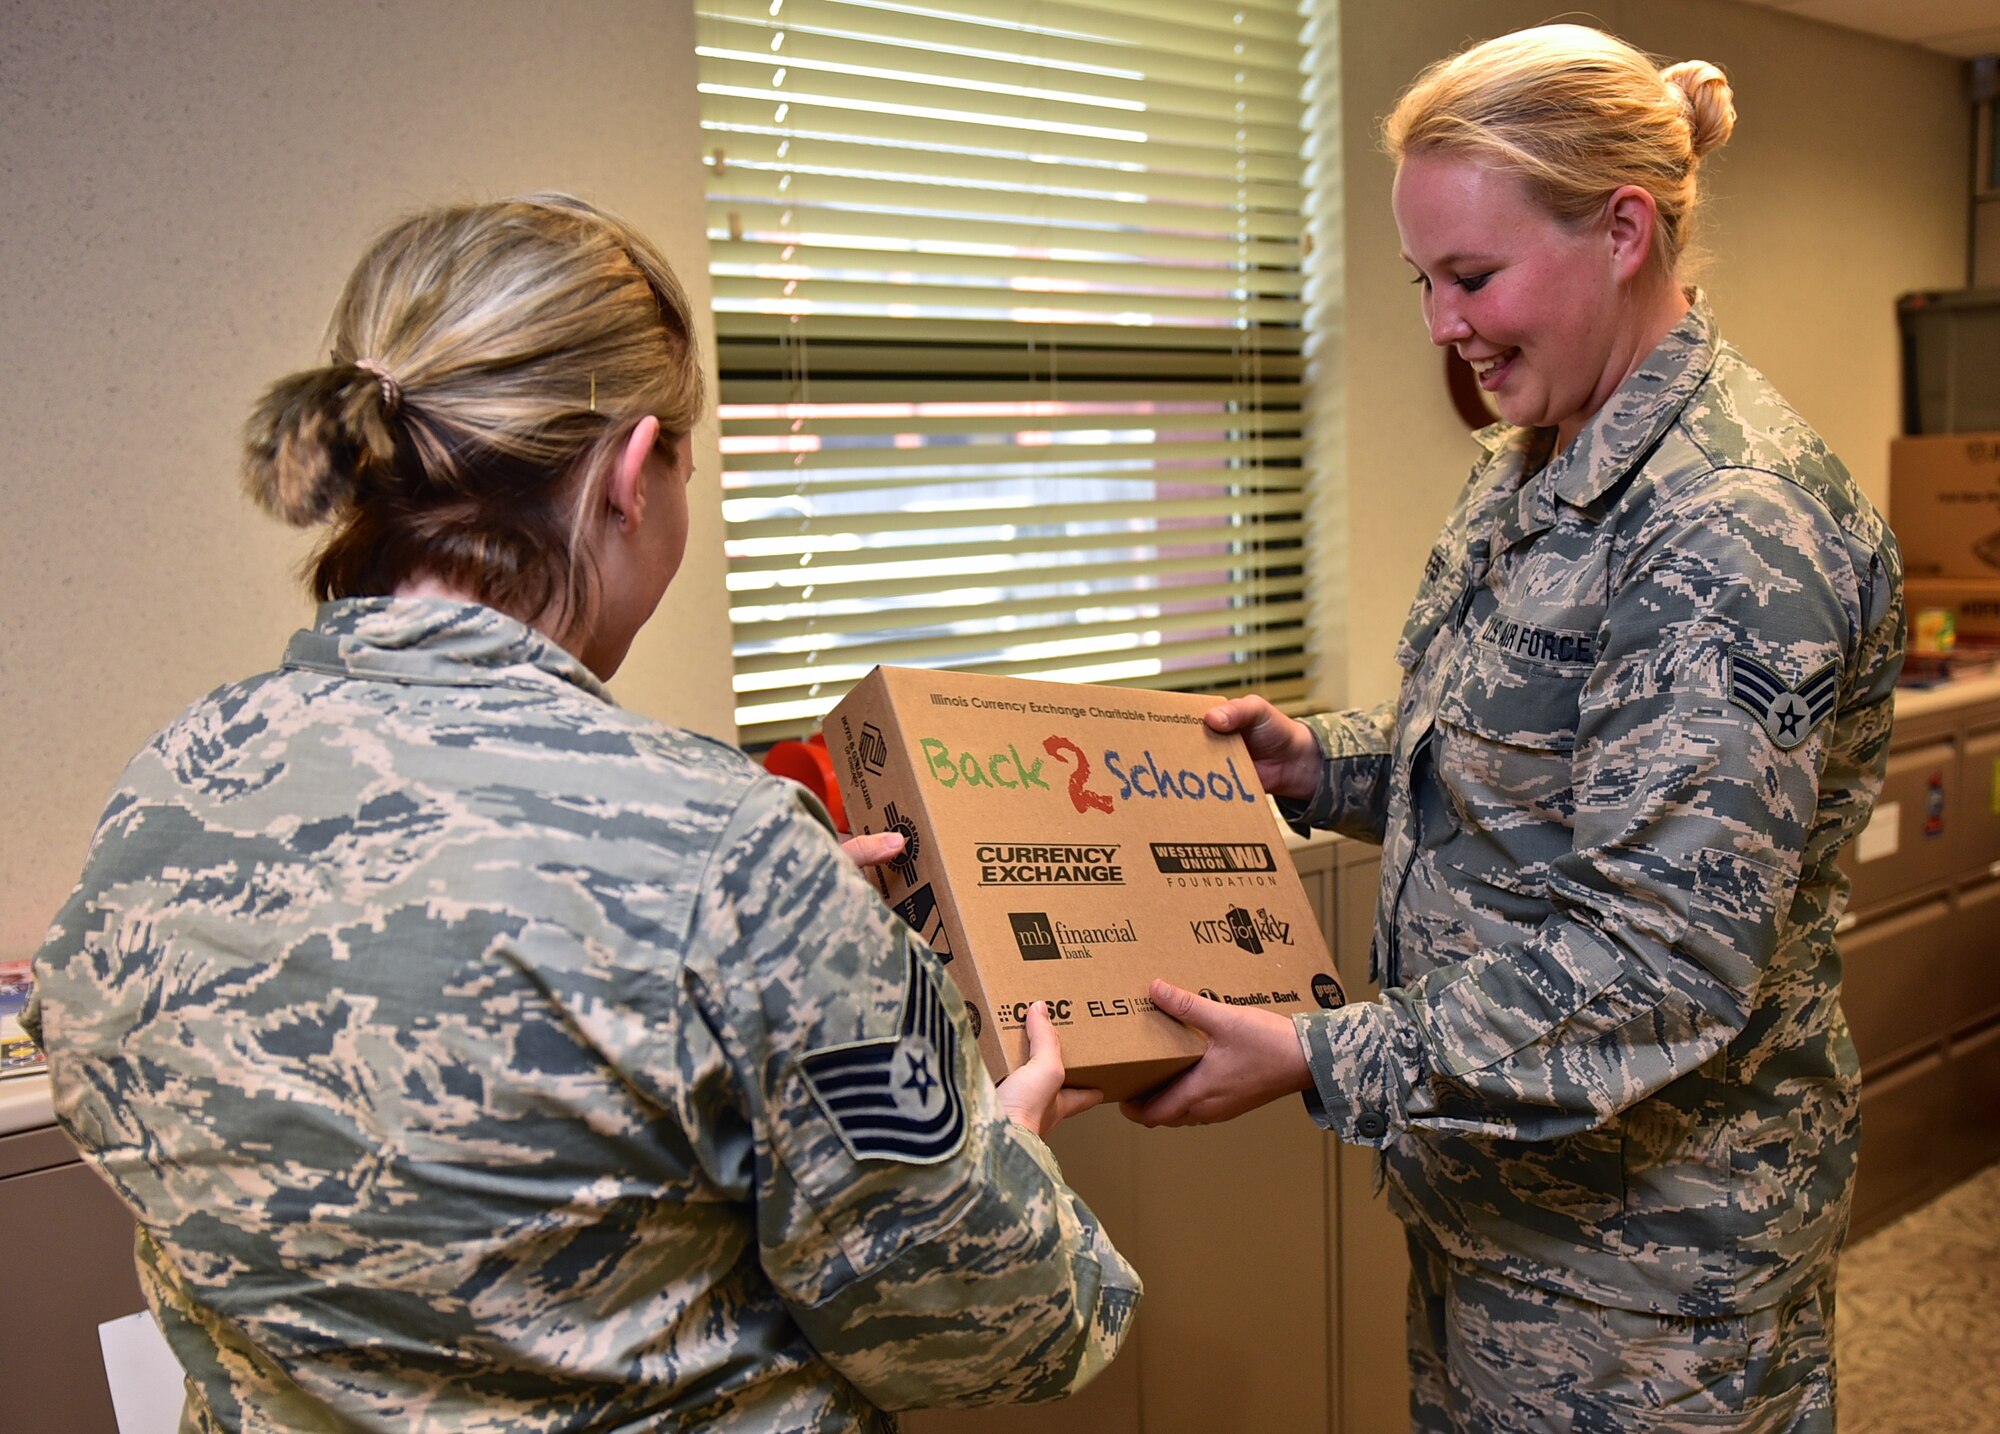 Senior Airman Ashley Albers, a material management clerk with the 932nd Logistics Readiness Flight, is handed an age specific back to school kit from Tech. Sgt. Roxanne Wood, Non-Commissioned Officer in Charge with the 932nd Airlift Wing Airman and Family Readiness section.  Various school supplies and pre-made kits are donated by Operation Home Front as a way to help ease expenses for Airmen and their families.  Albers has two school age children and they continue to use items from the kits they received last year. "I think this is very beneficial and my oldest loves to draw with the included paper," Albers said. (U.S. Air Force photo/Tech. Sgt. Christopher Parr)
